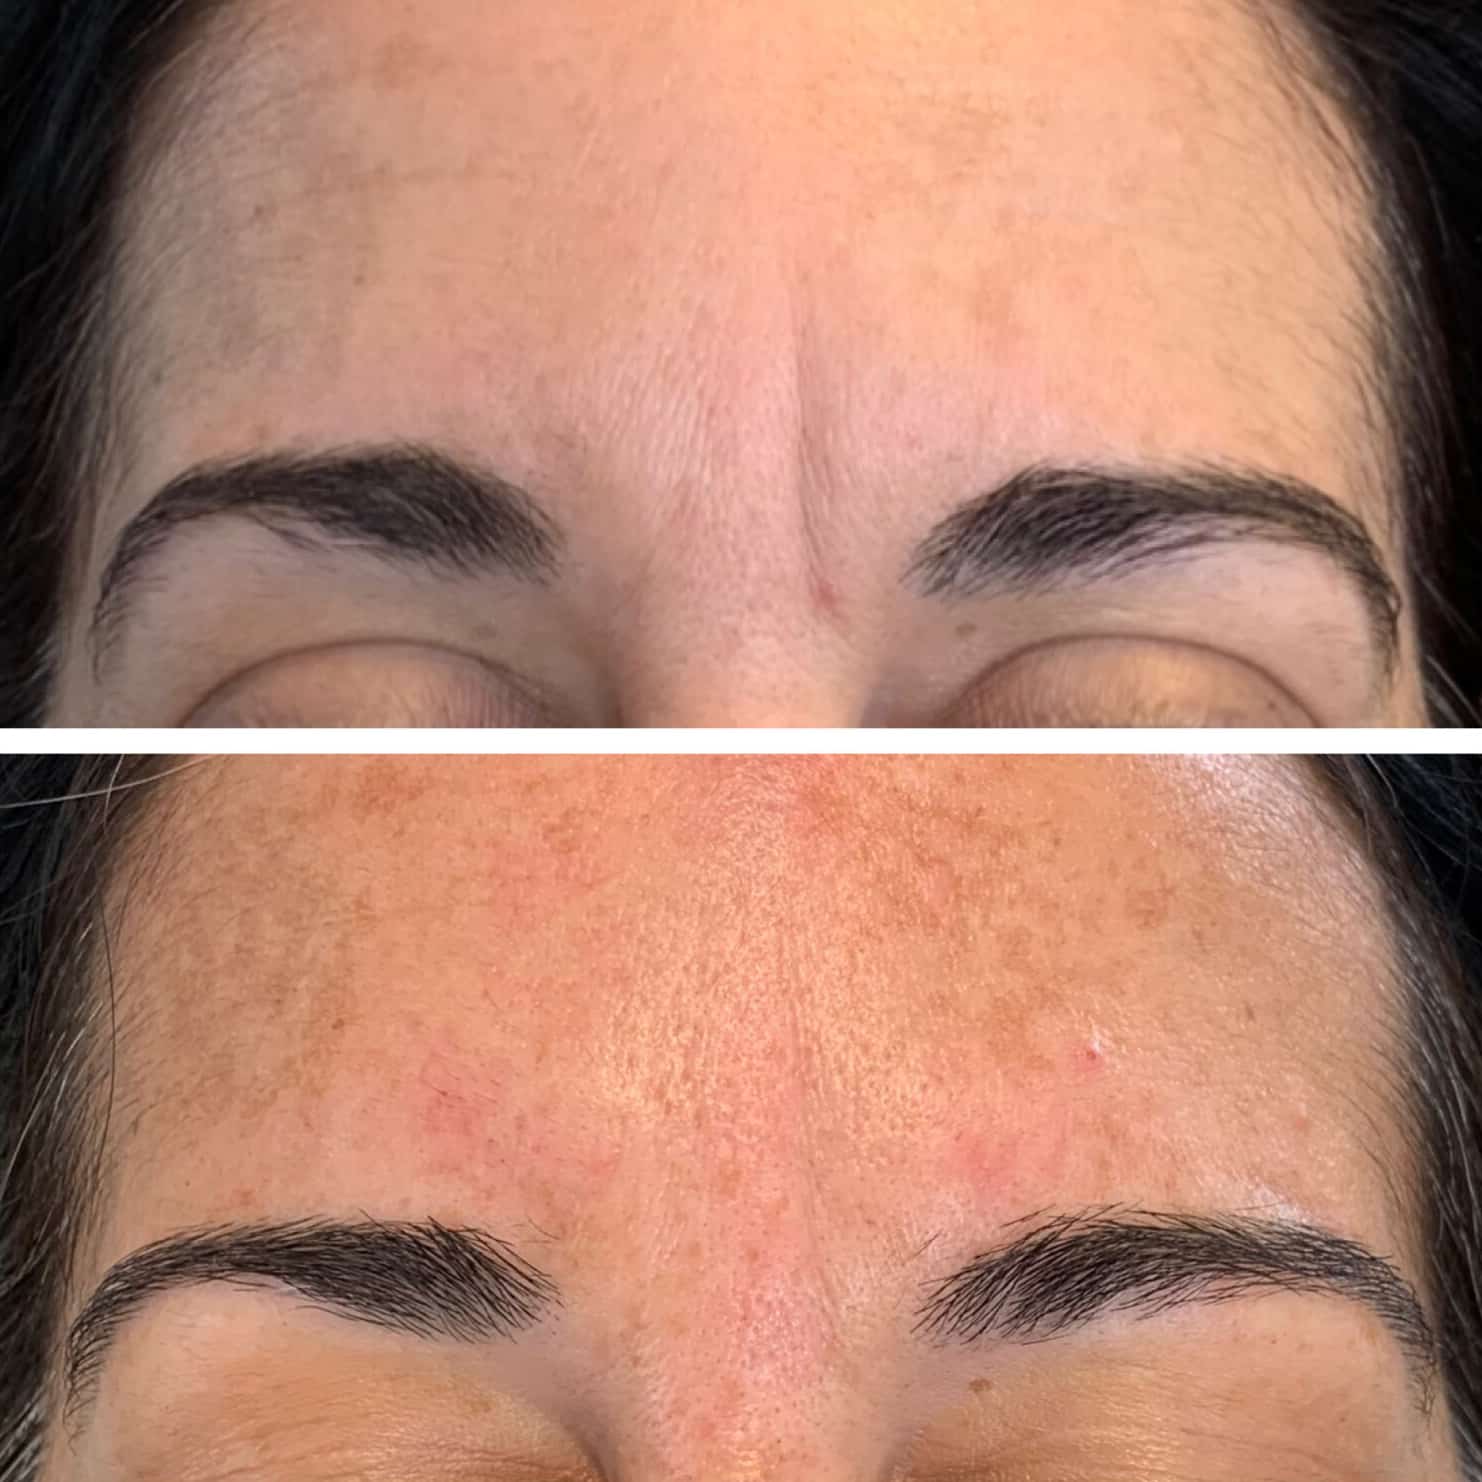 Woman's forehead showing improved tightened skin as a result of PDO threads.